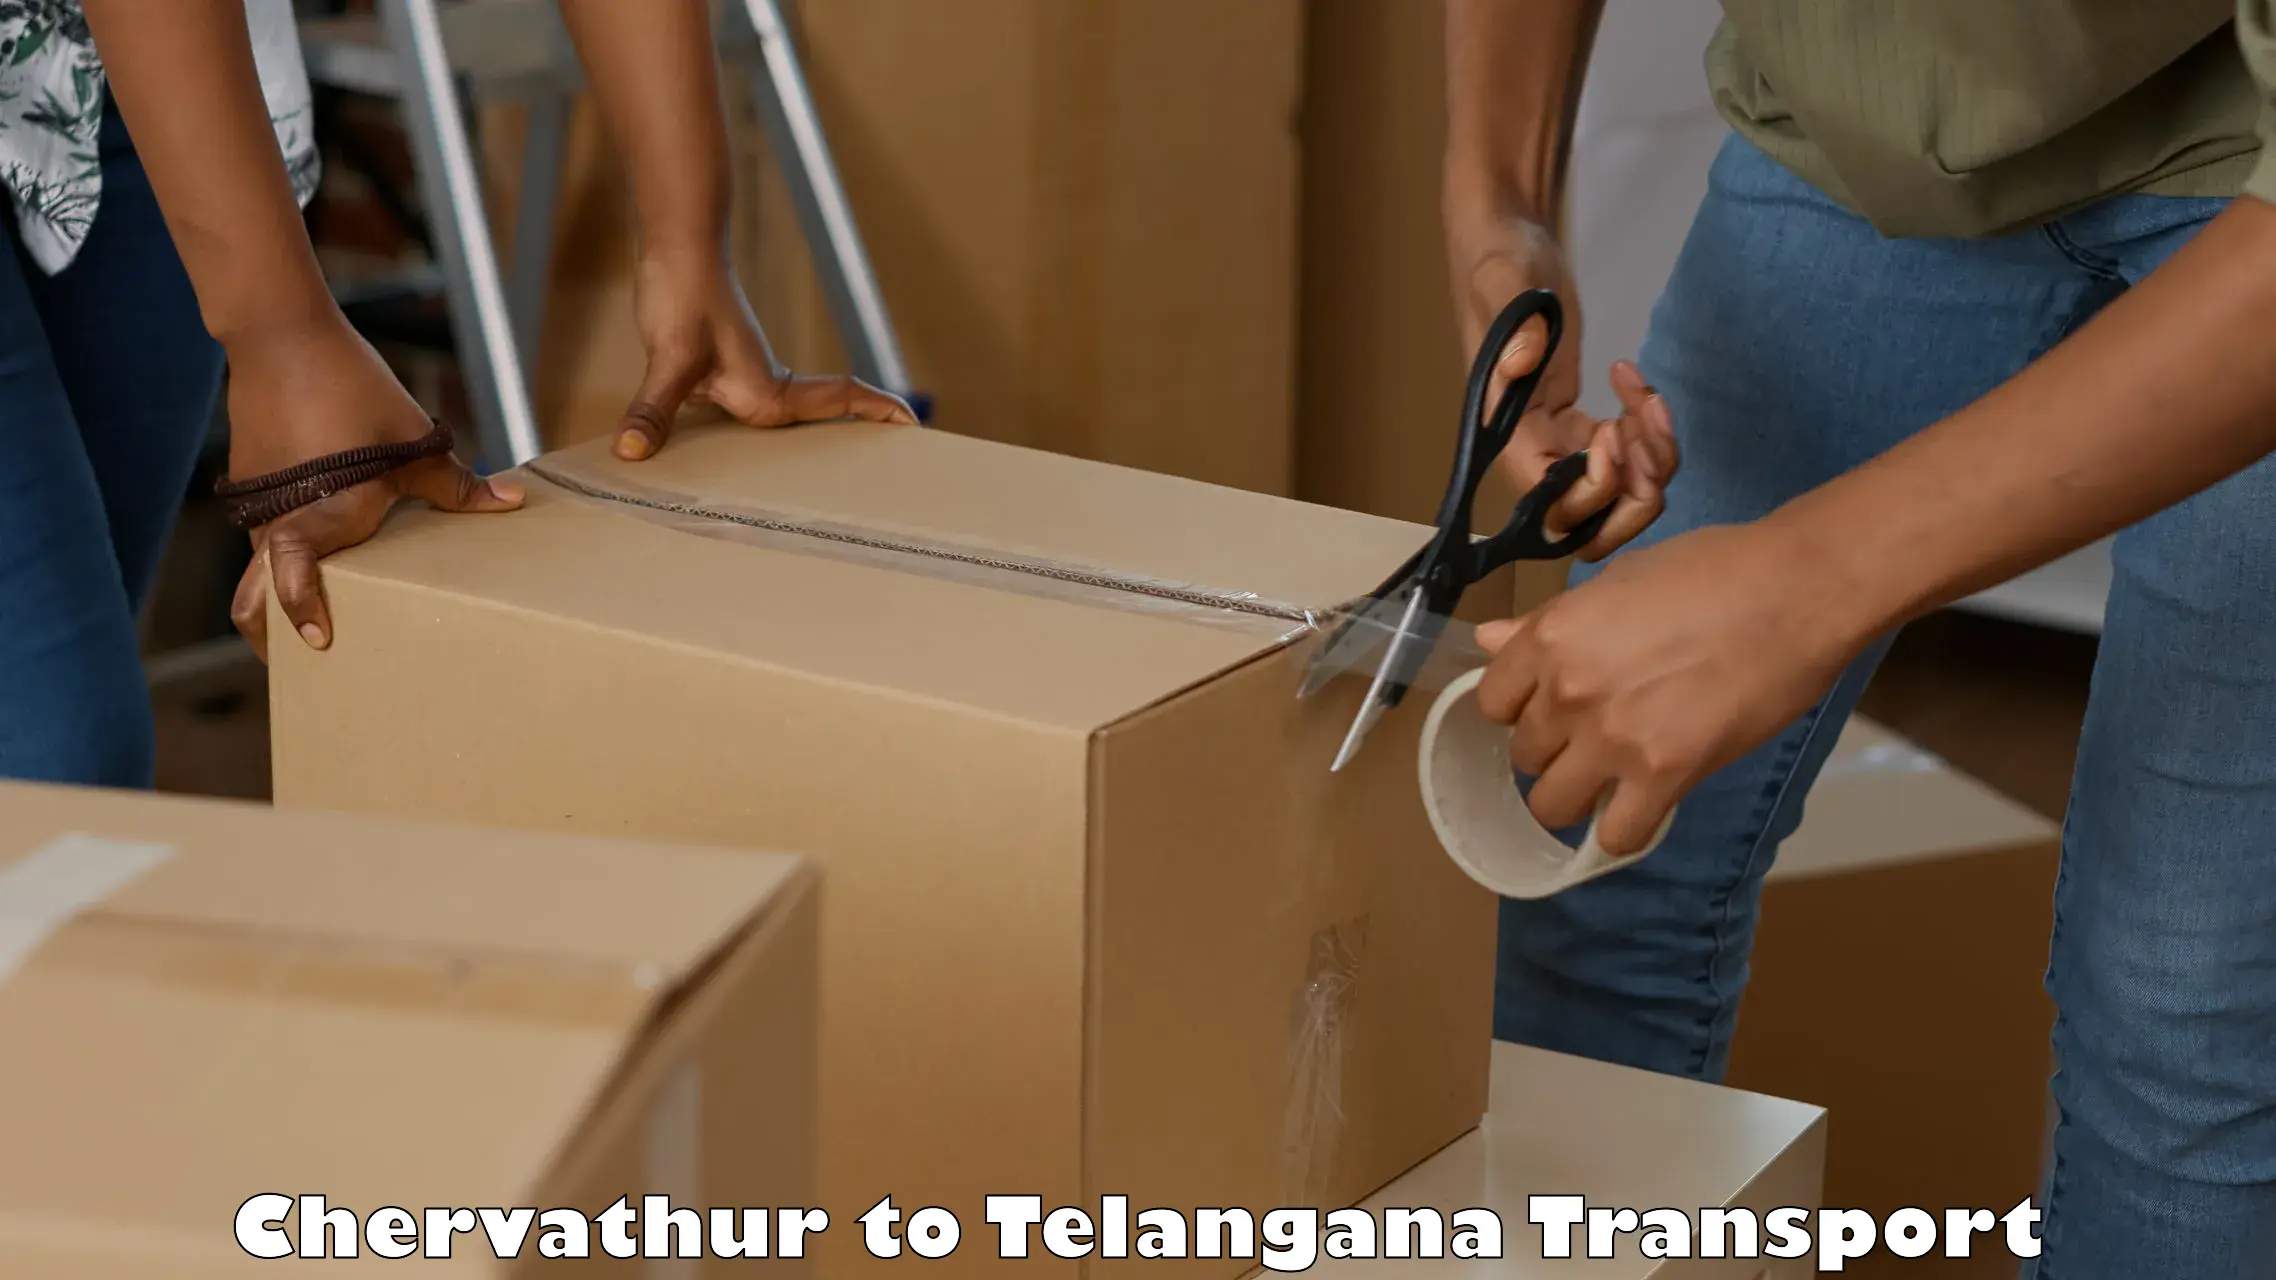 Goods delivery service Chervathur to Madhira